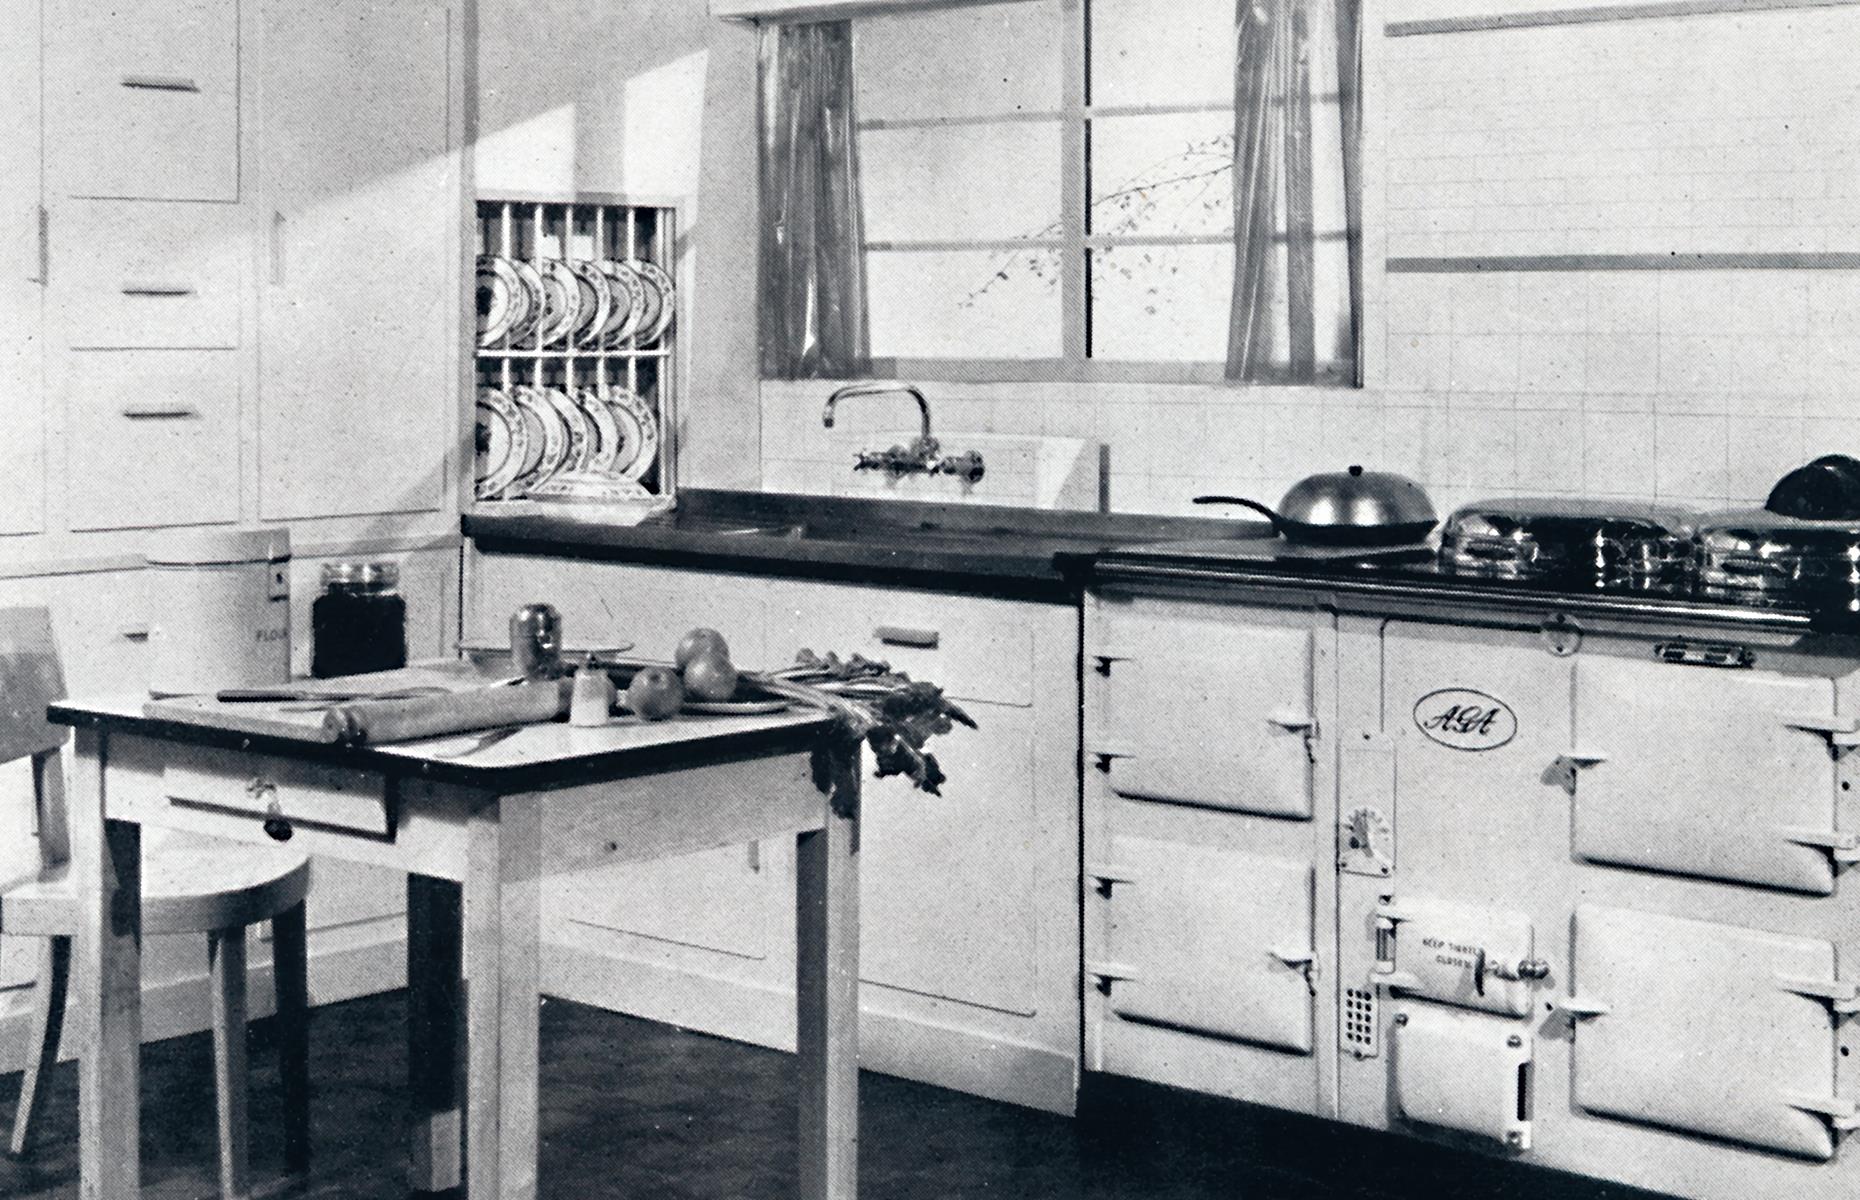 The Kitchen Appliances That Revolutionized The Way We C pic